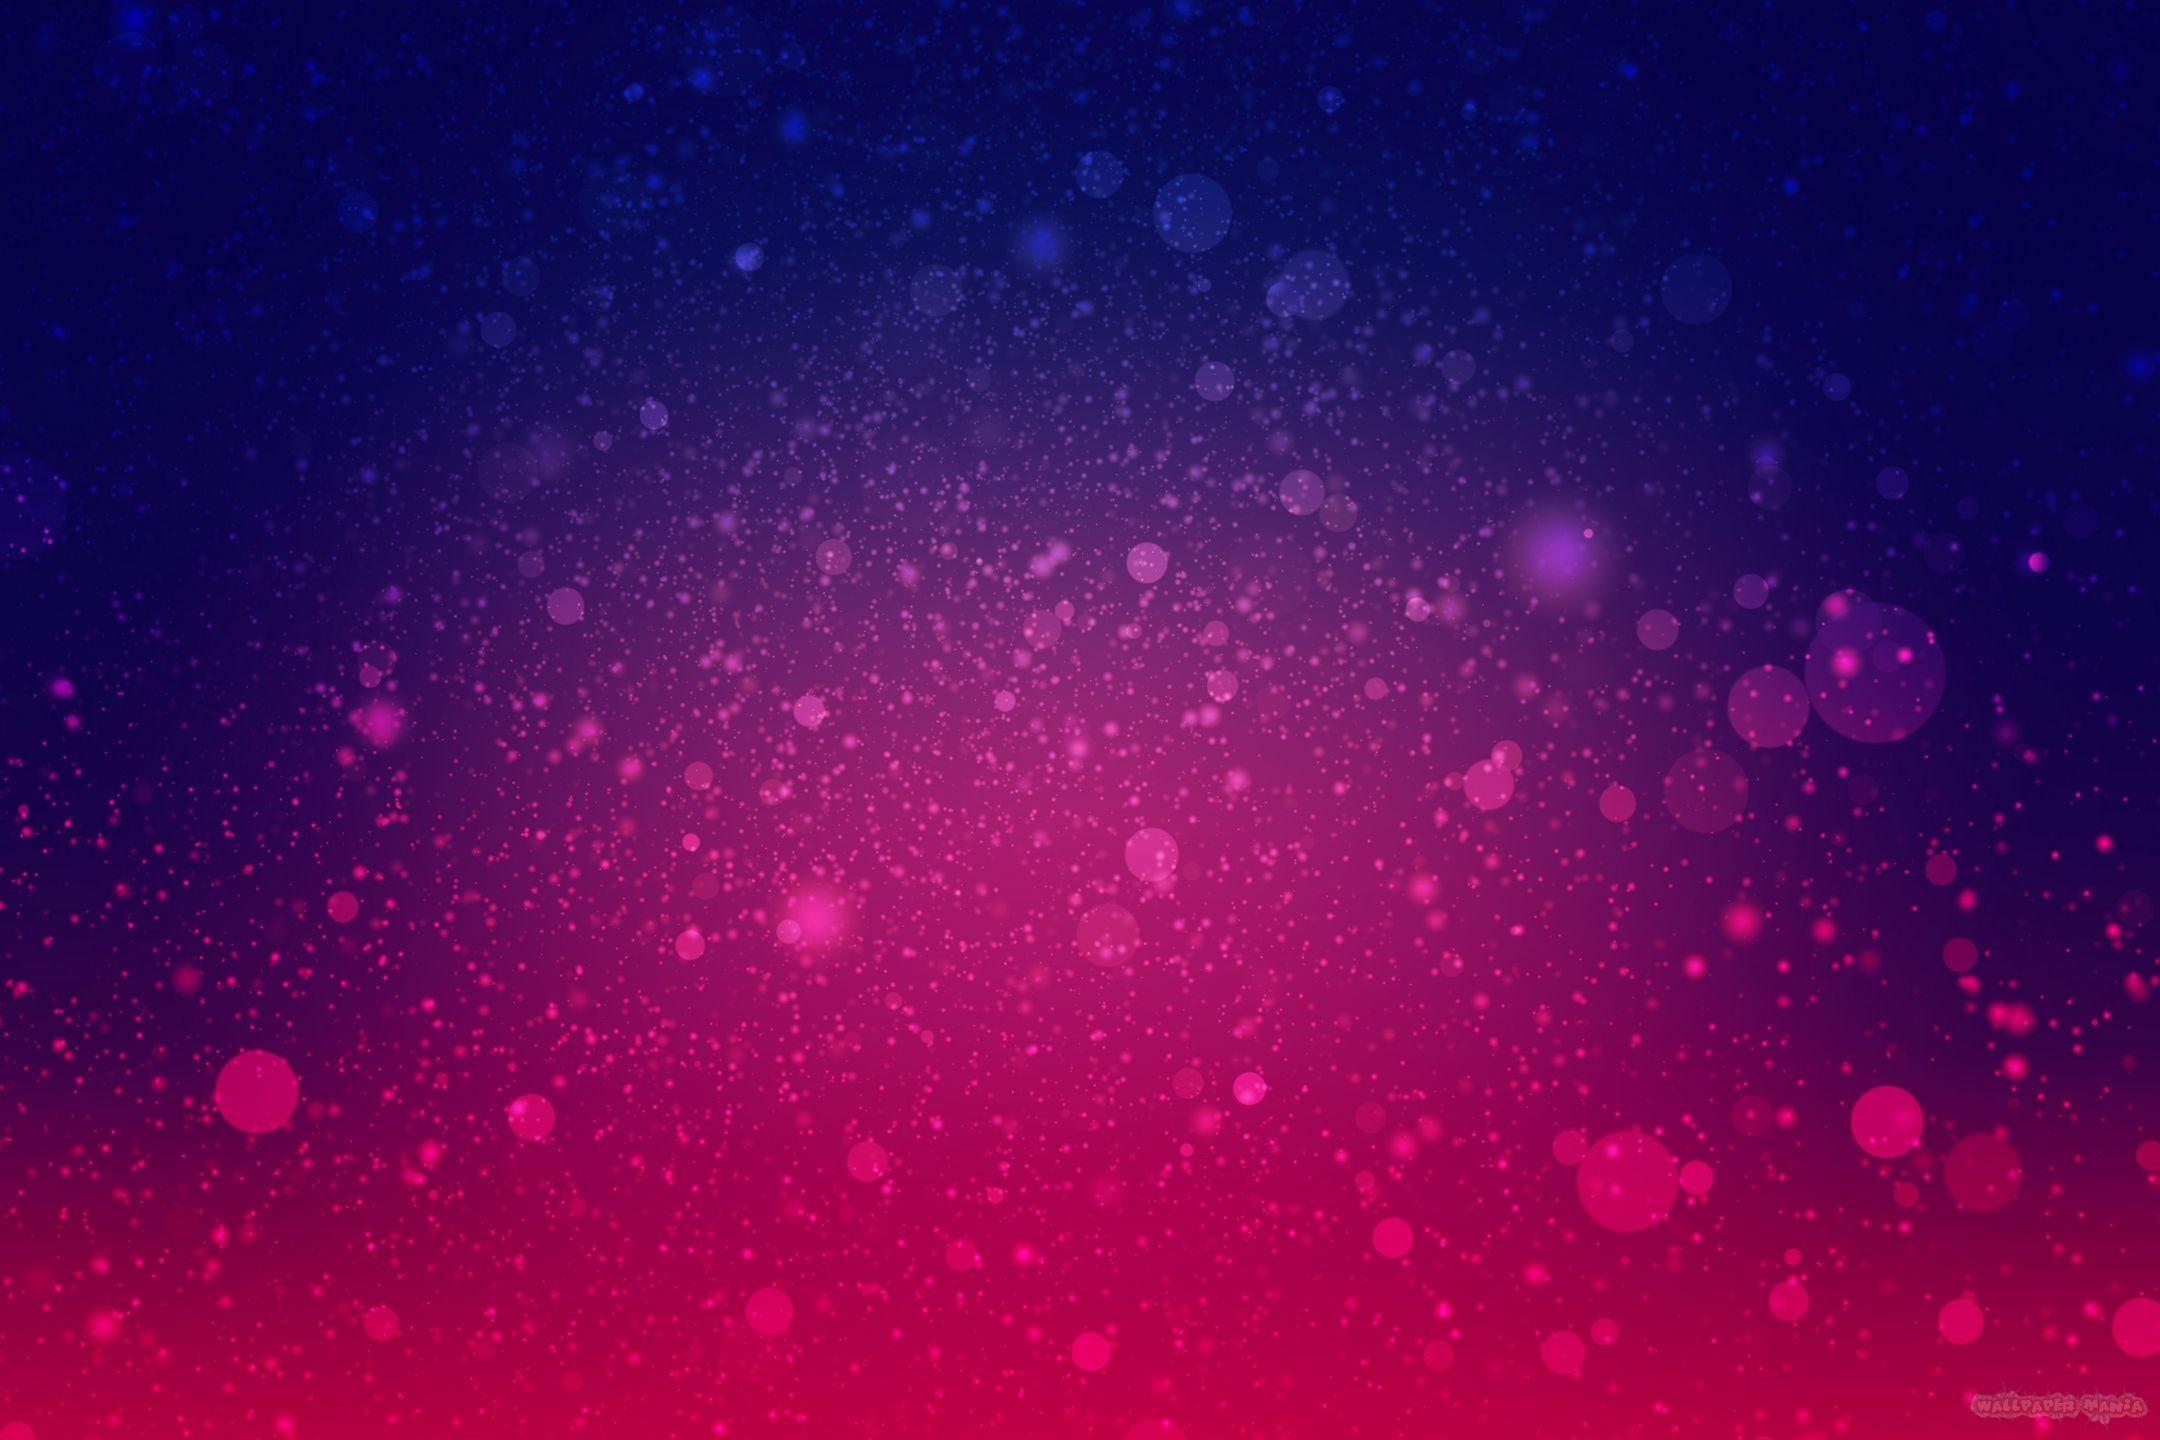 Dark Pink And Blue Abstract Wallpapers - Top Free Dark Pink And Blue